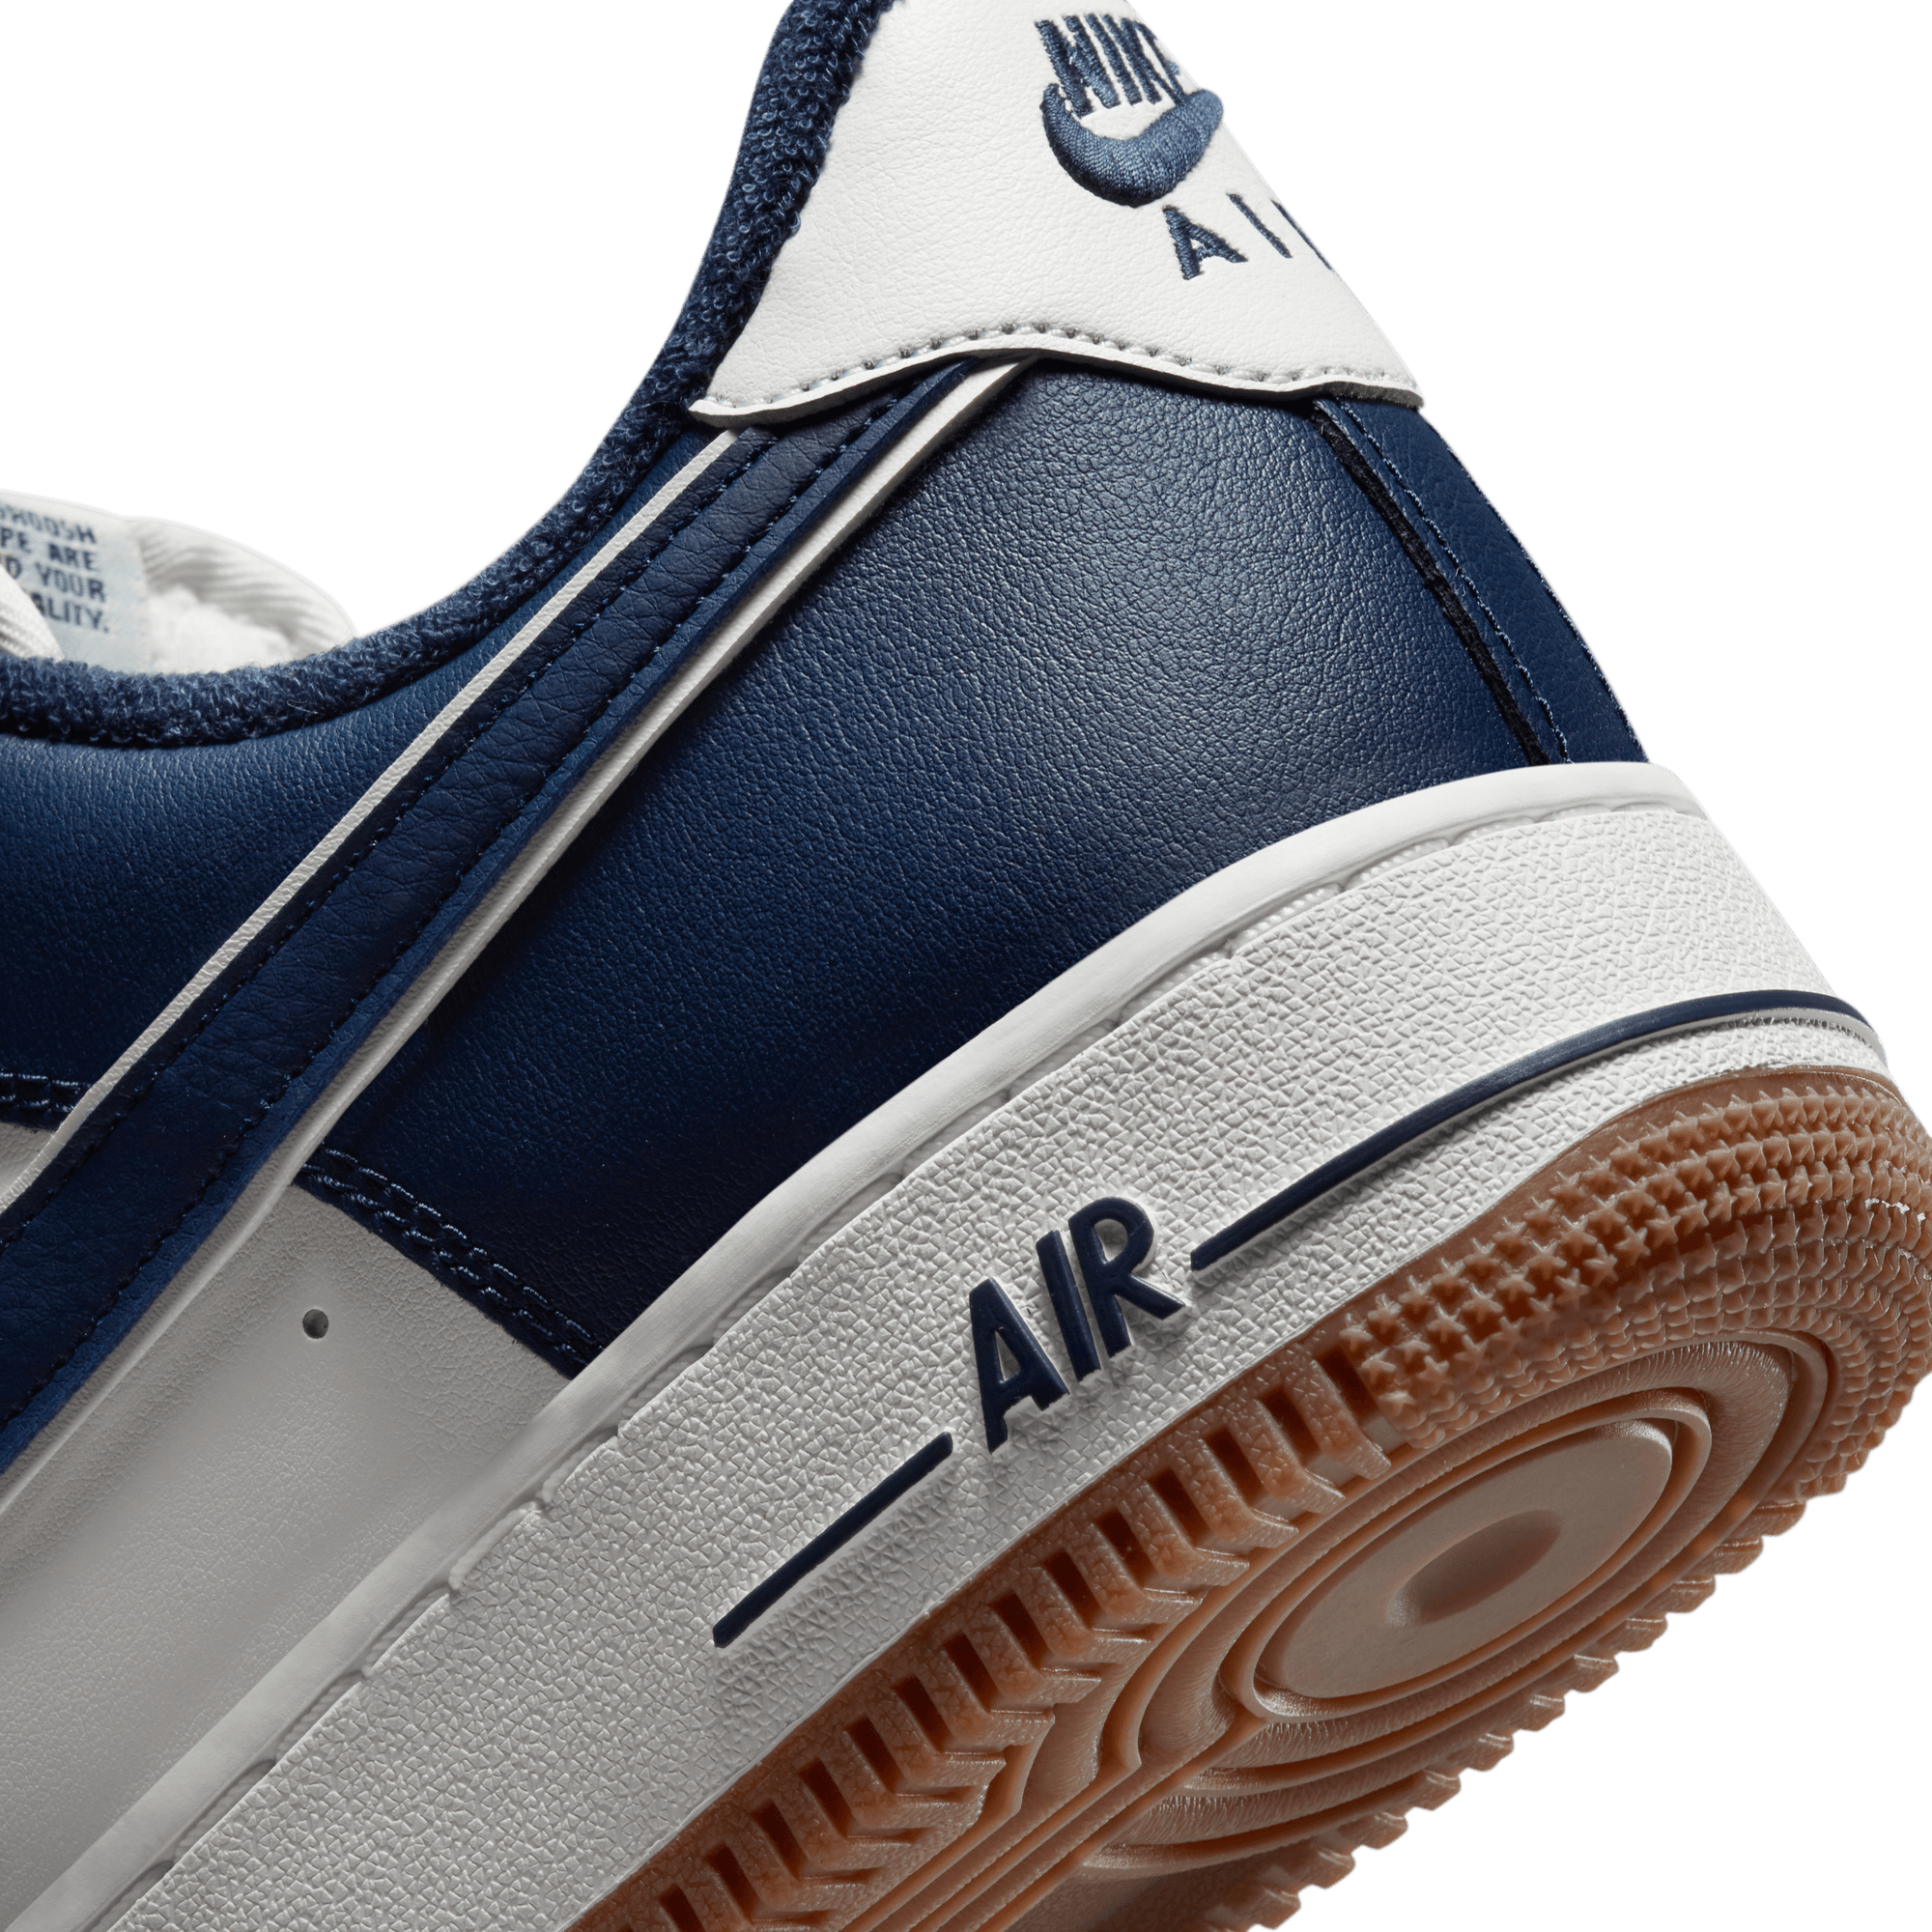 Nike Air Force 1 '07 LV8 'Midnight Navy'